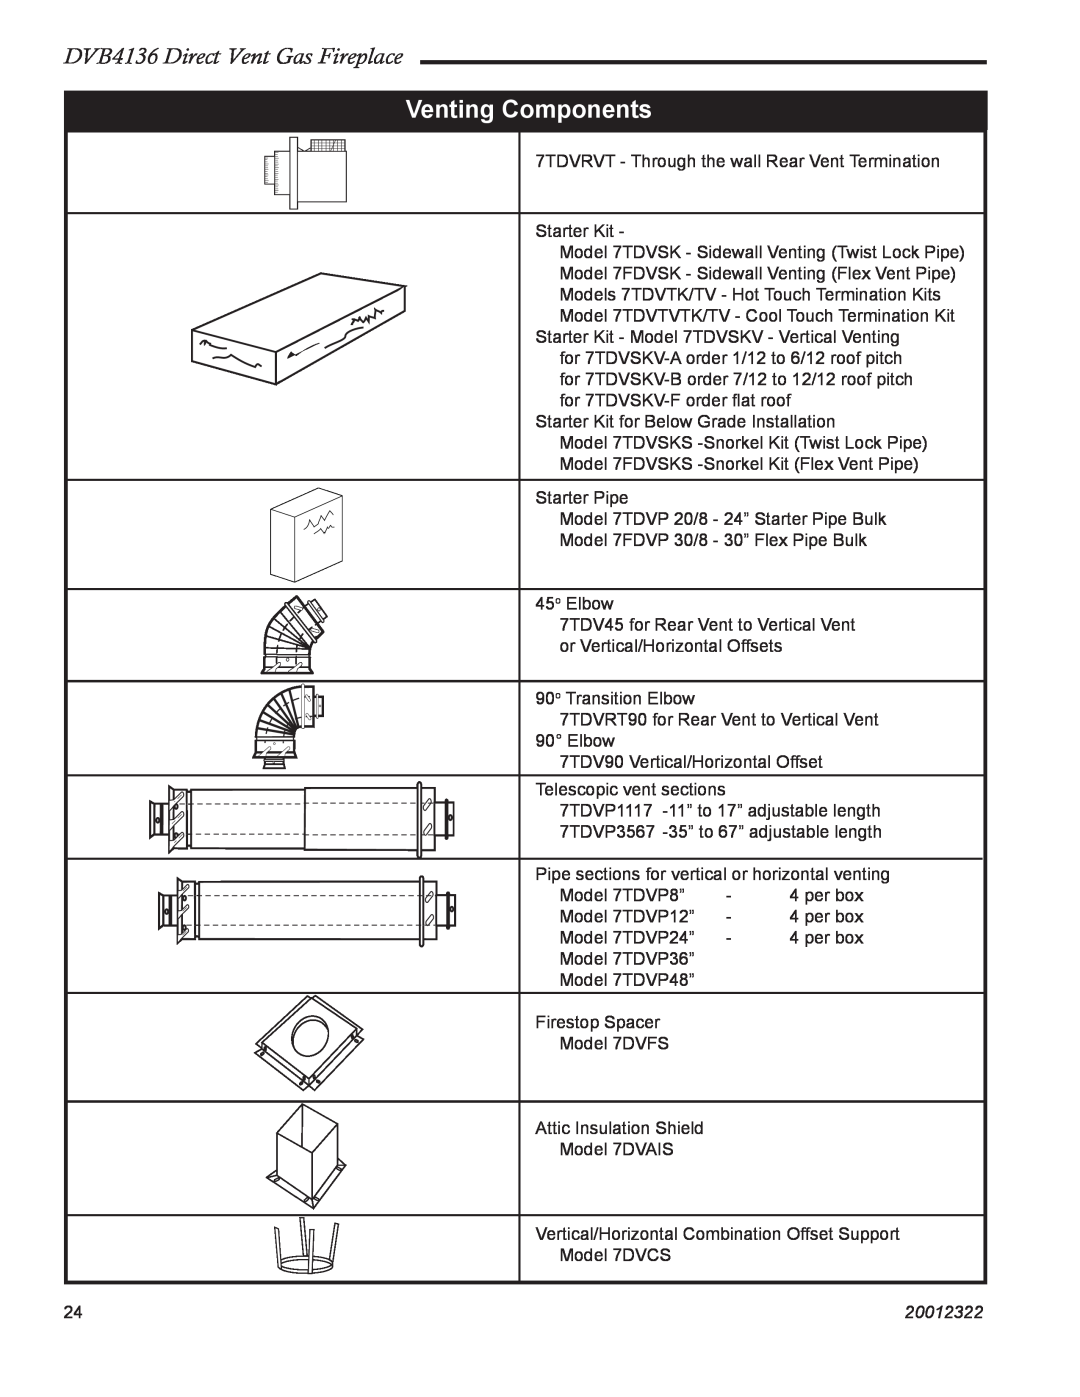 Majestic Appliances manual Venting Components, DVB4136 Direct Vent Gas Fireplace, 20012322 